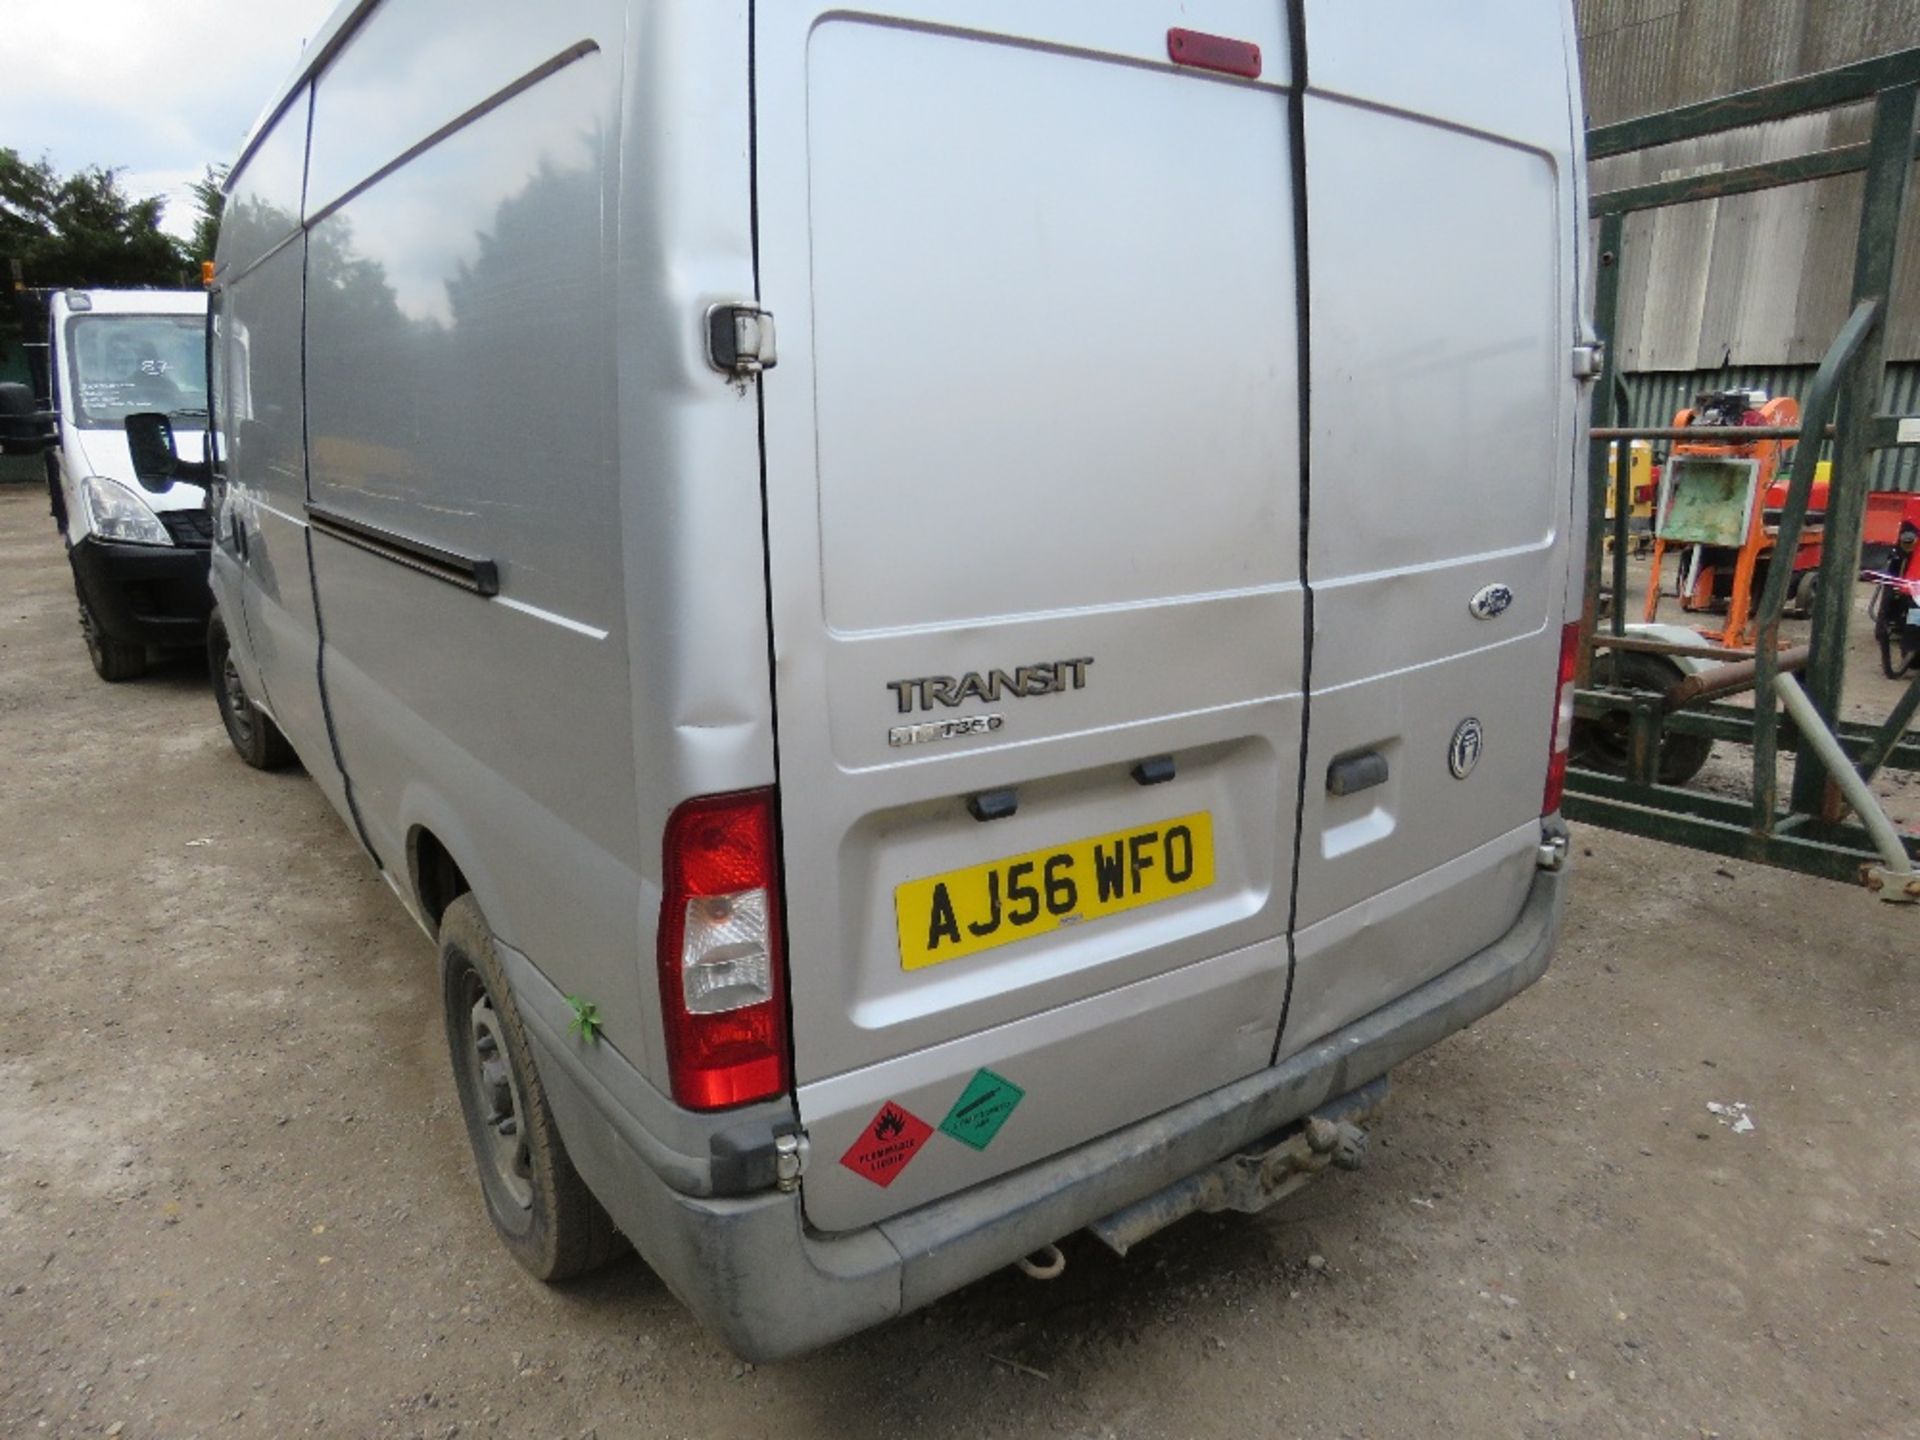 FORD TRANSIT 115T350 PANEL VAN, TEST EXPIRED, WITH V5 REG: AJ56 WFO WHEN TESTED WAS SEEN TO DRIVE - Image 4 of 5